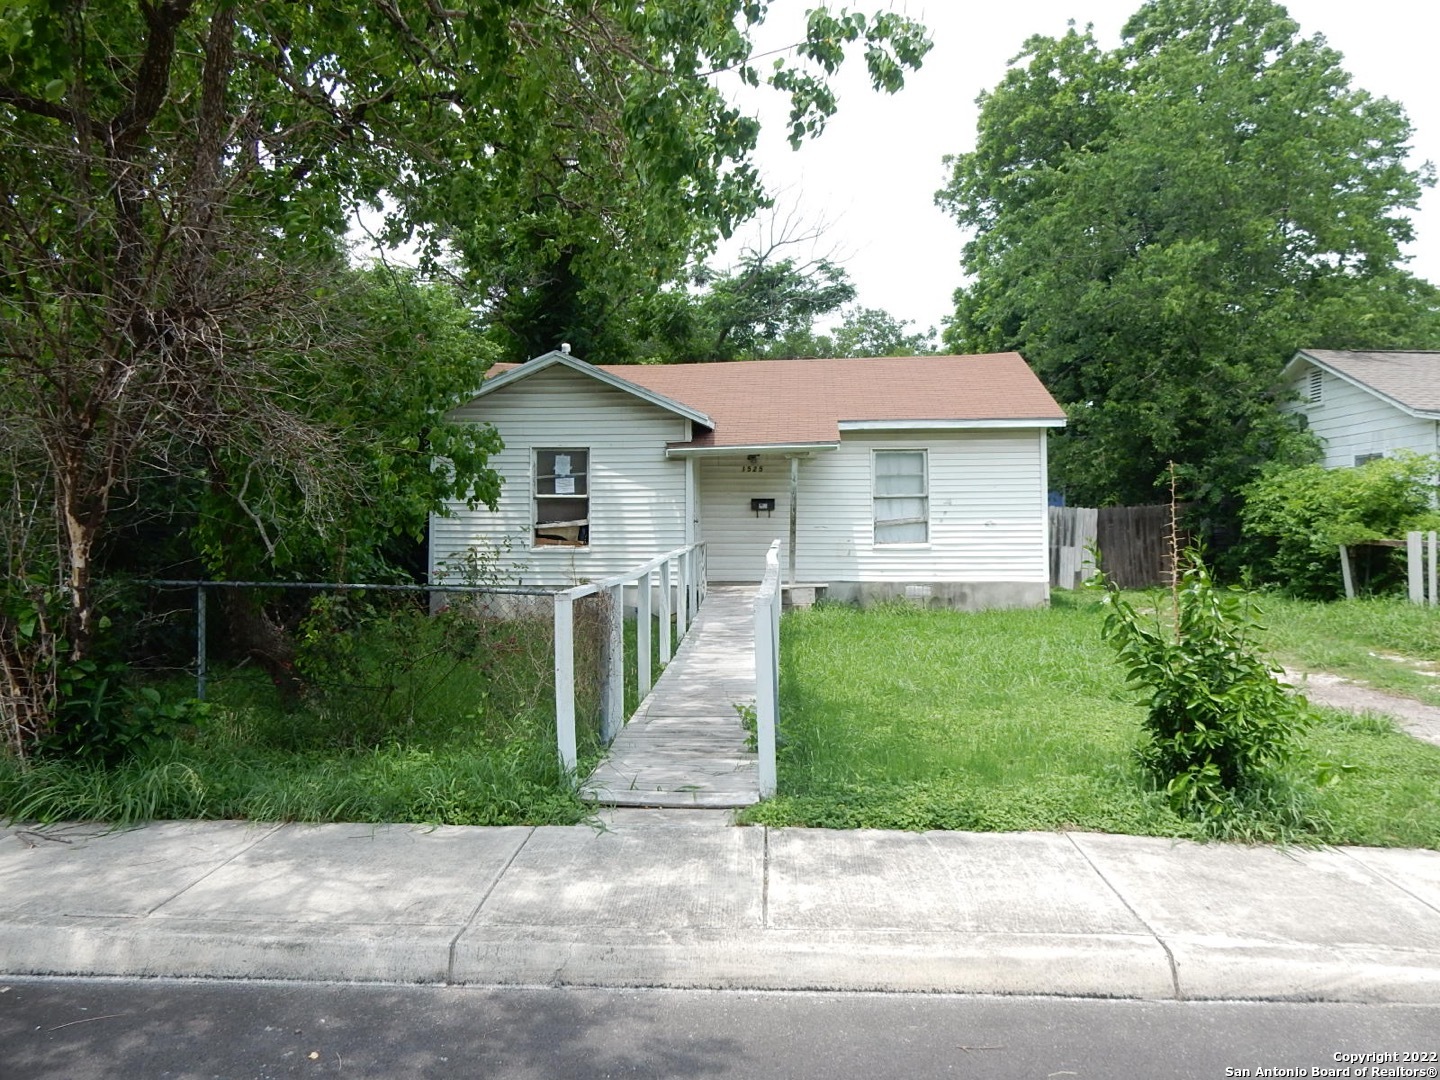 Excellent opportunity. Check out the size of these rooms. The bedroom was originally two bedrooms but the wall has been removed. There are two storage sheds. The large one has electricity and could be a shop or detached apartment. So many possibilities! The area is convenient to I-10, I-410, and the downtown business district. It is strongly encouraged that all offers contain proof of funds. Seller exempt from disclosure.